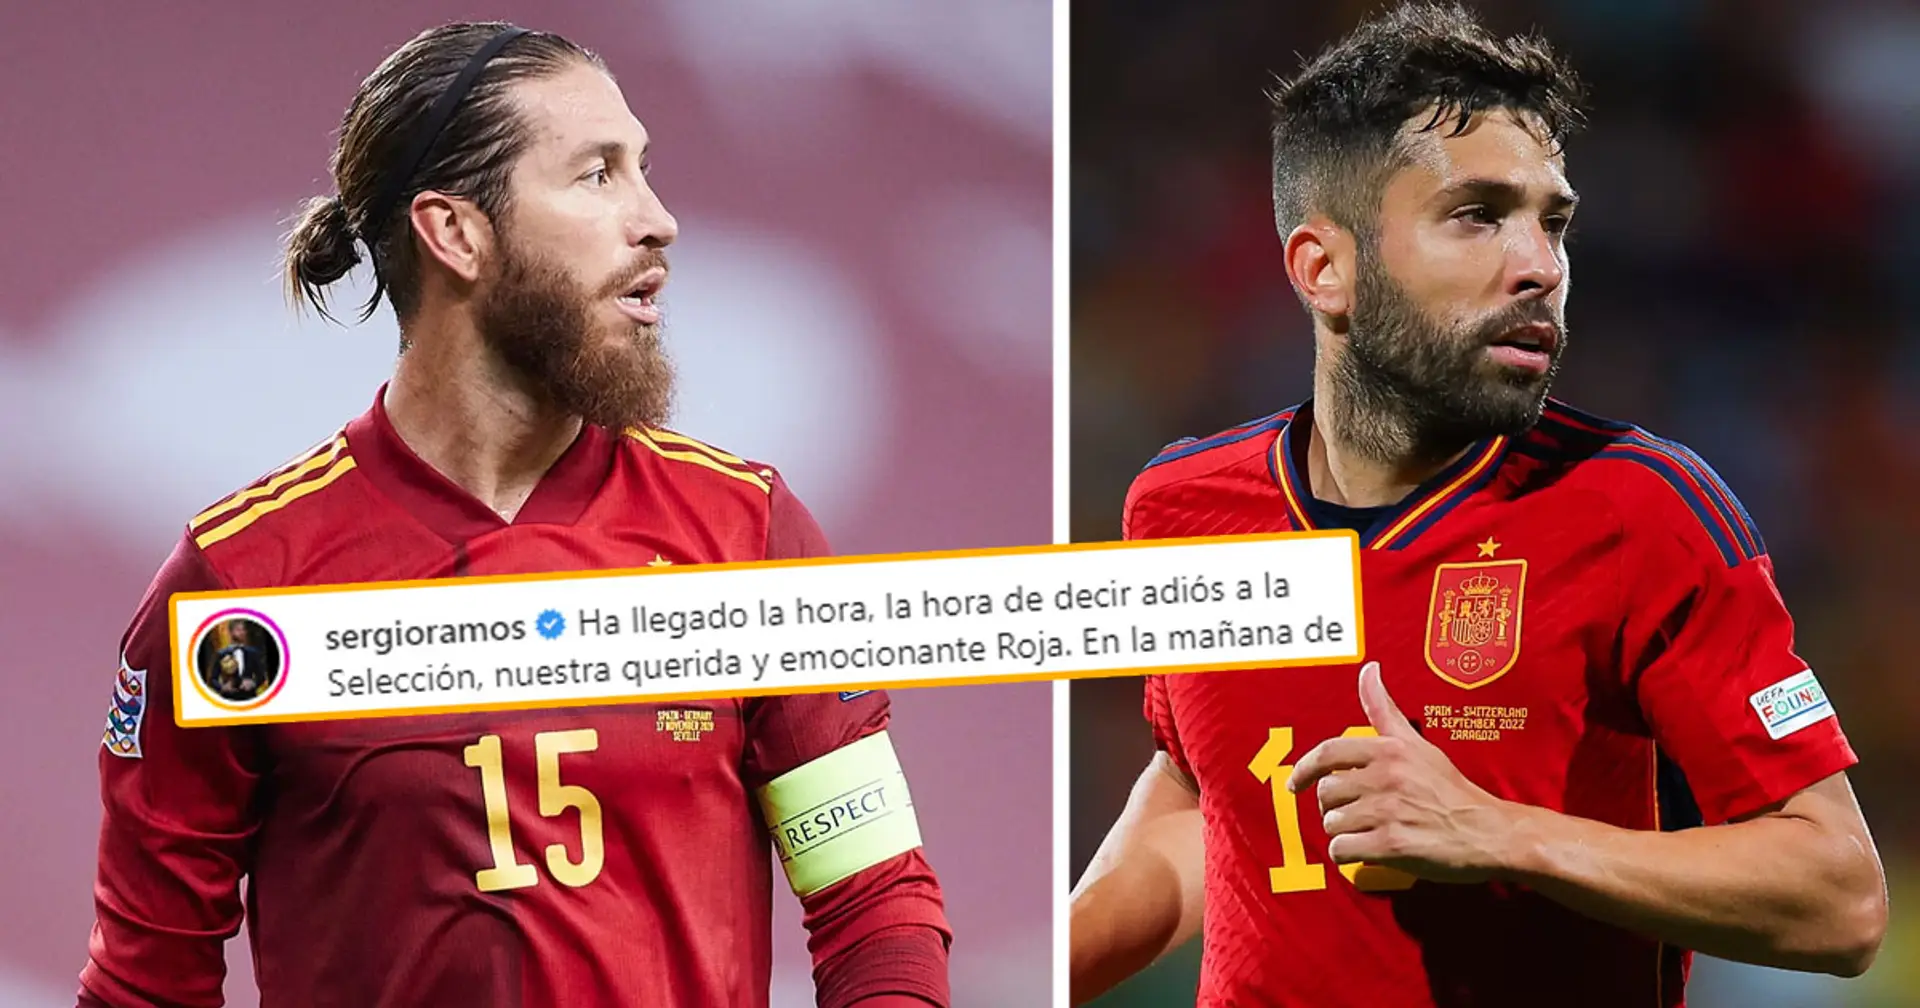 Jordi Alba to become Spain national team captain after Sergio Ramos announces retirement